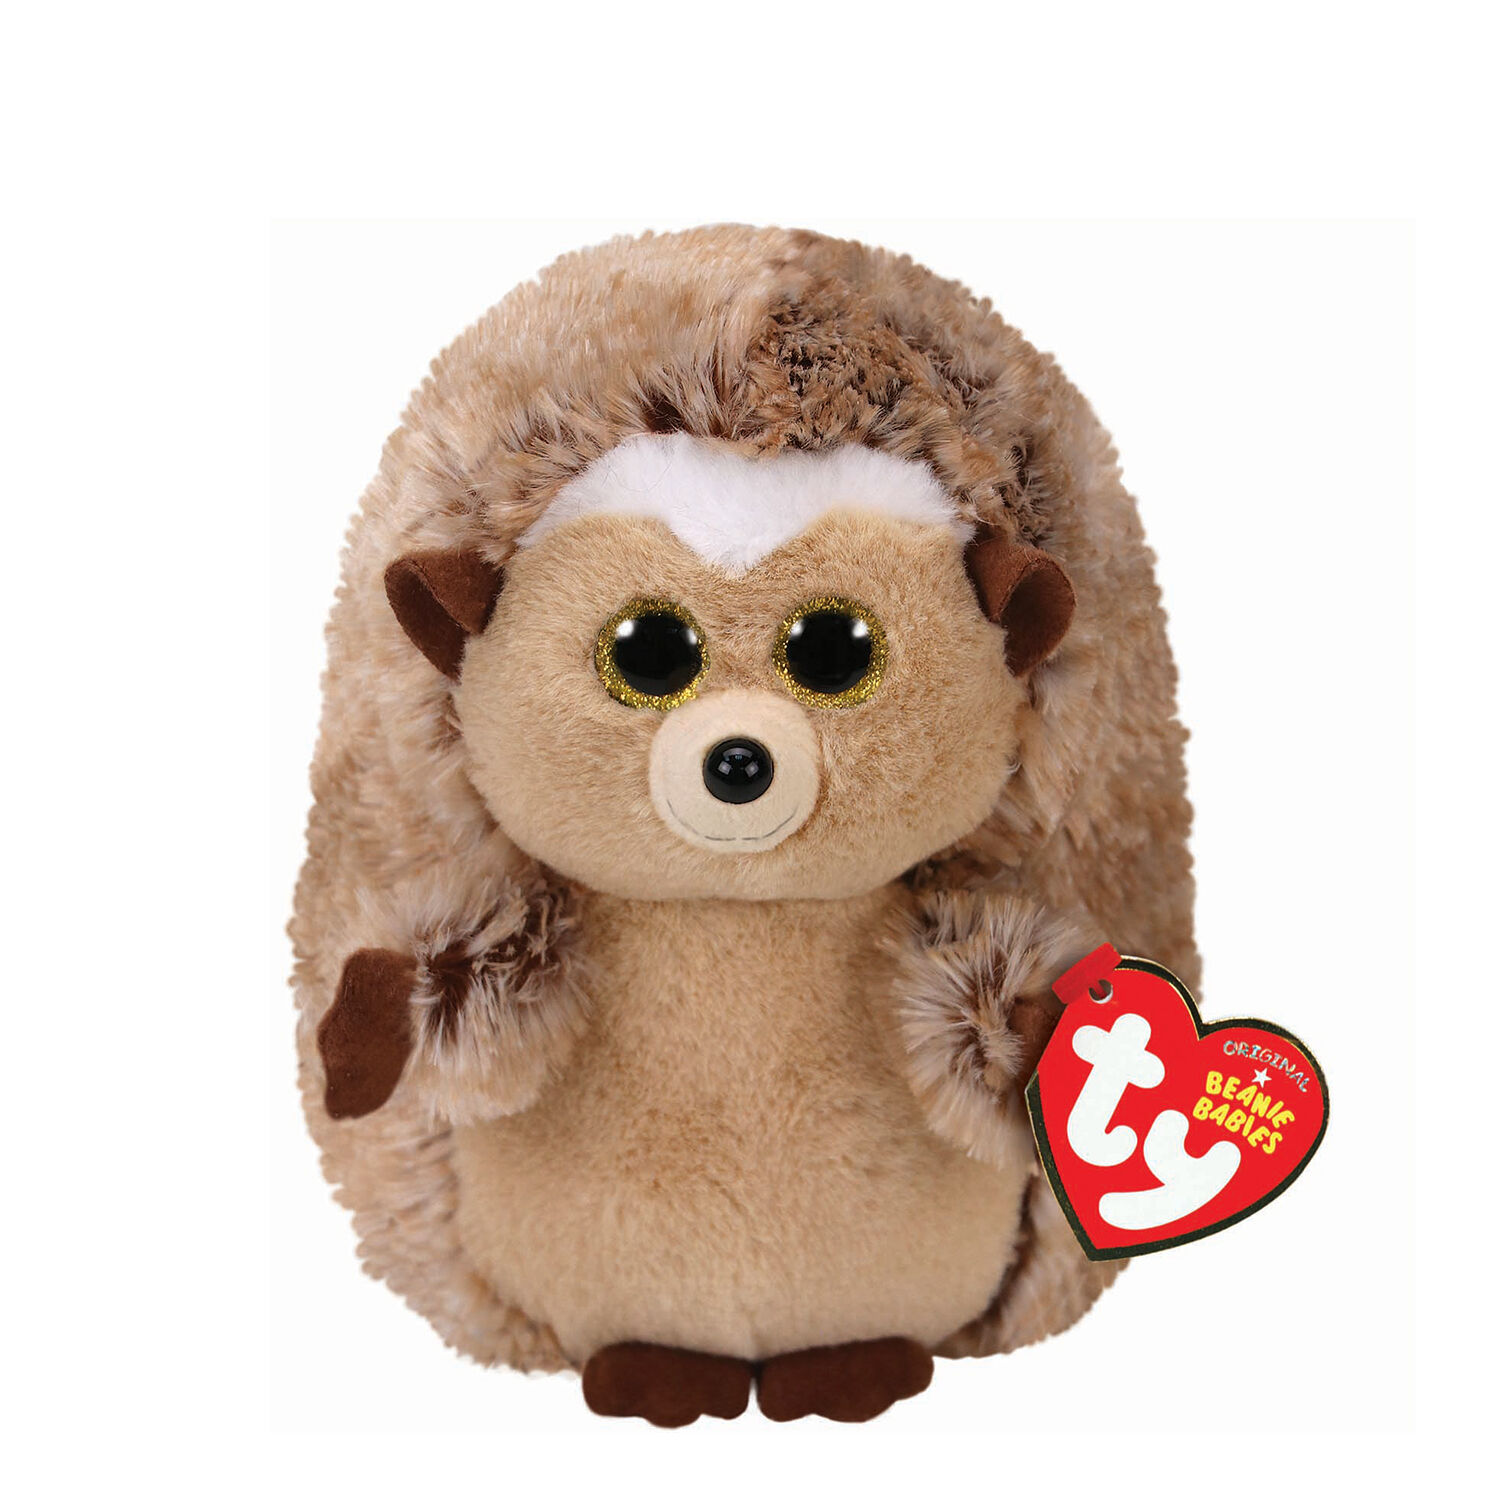 beanie babies age appropriate